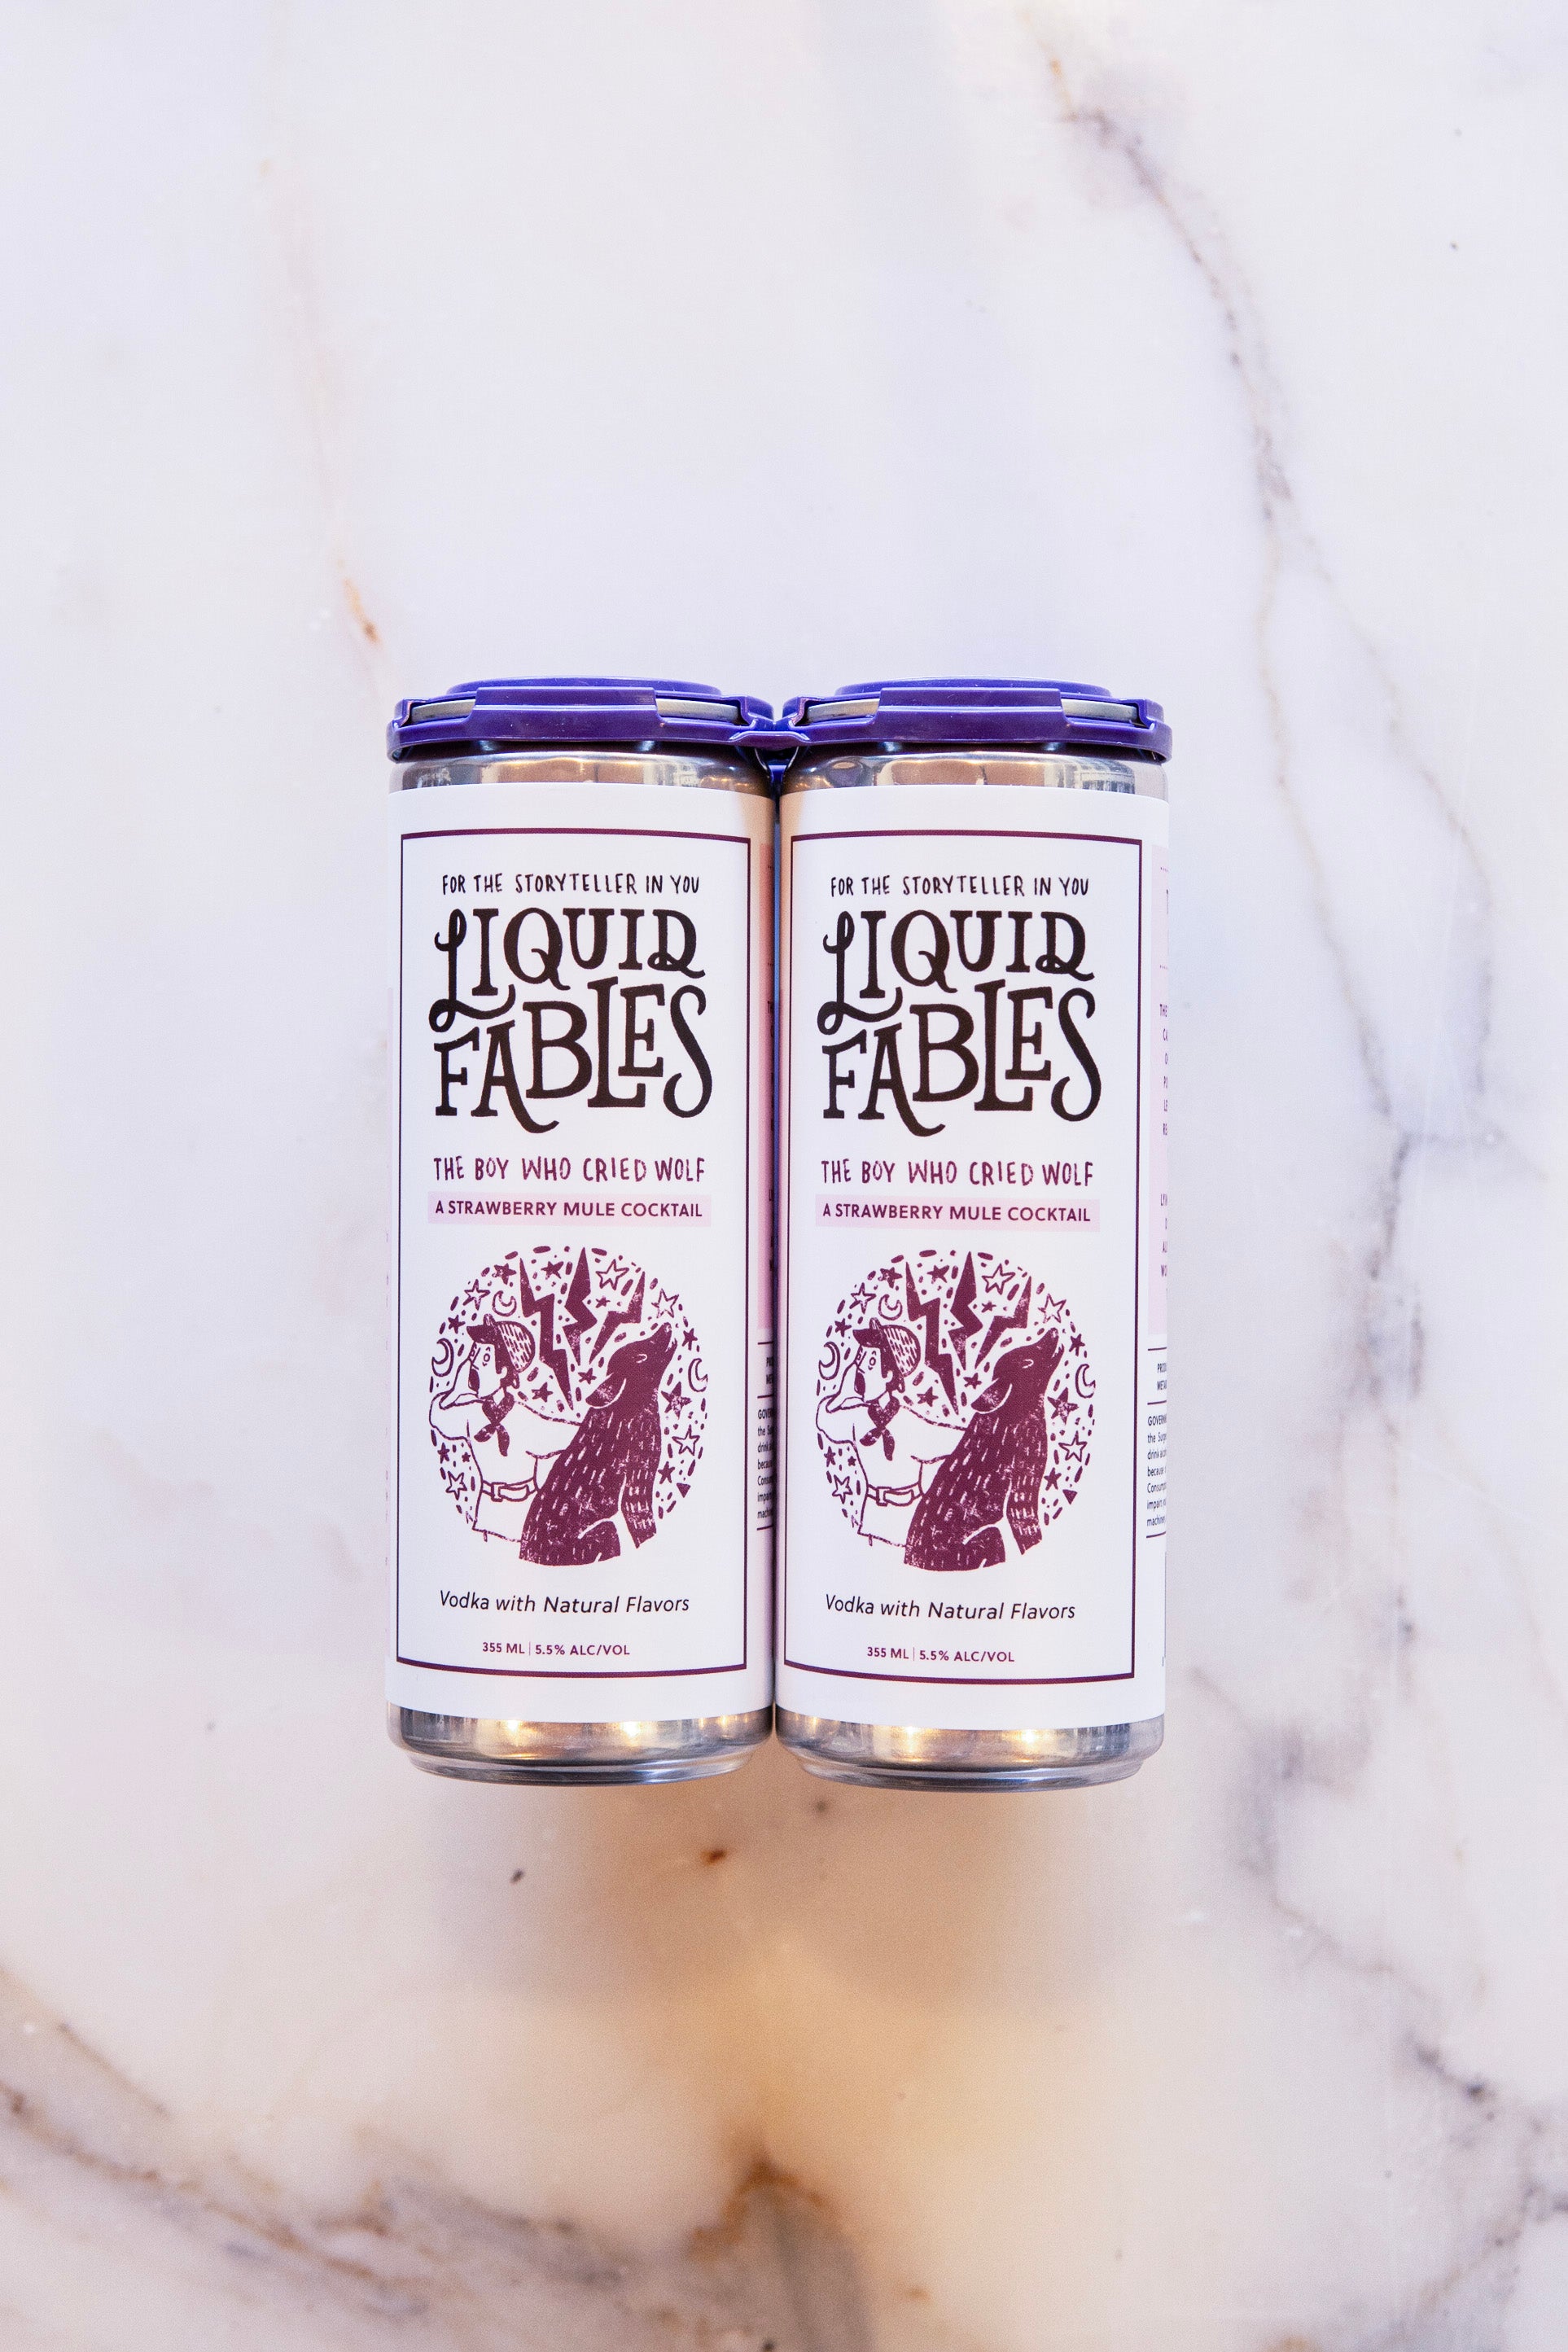 Liquid Fables 4 Pack Boy Who Cried Wolf Strawberry Mule Cocktail